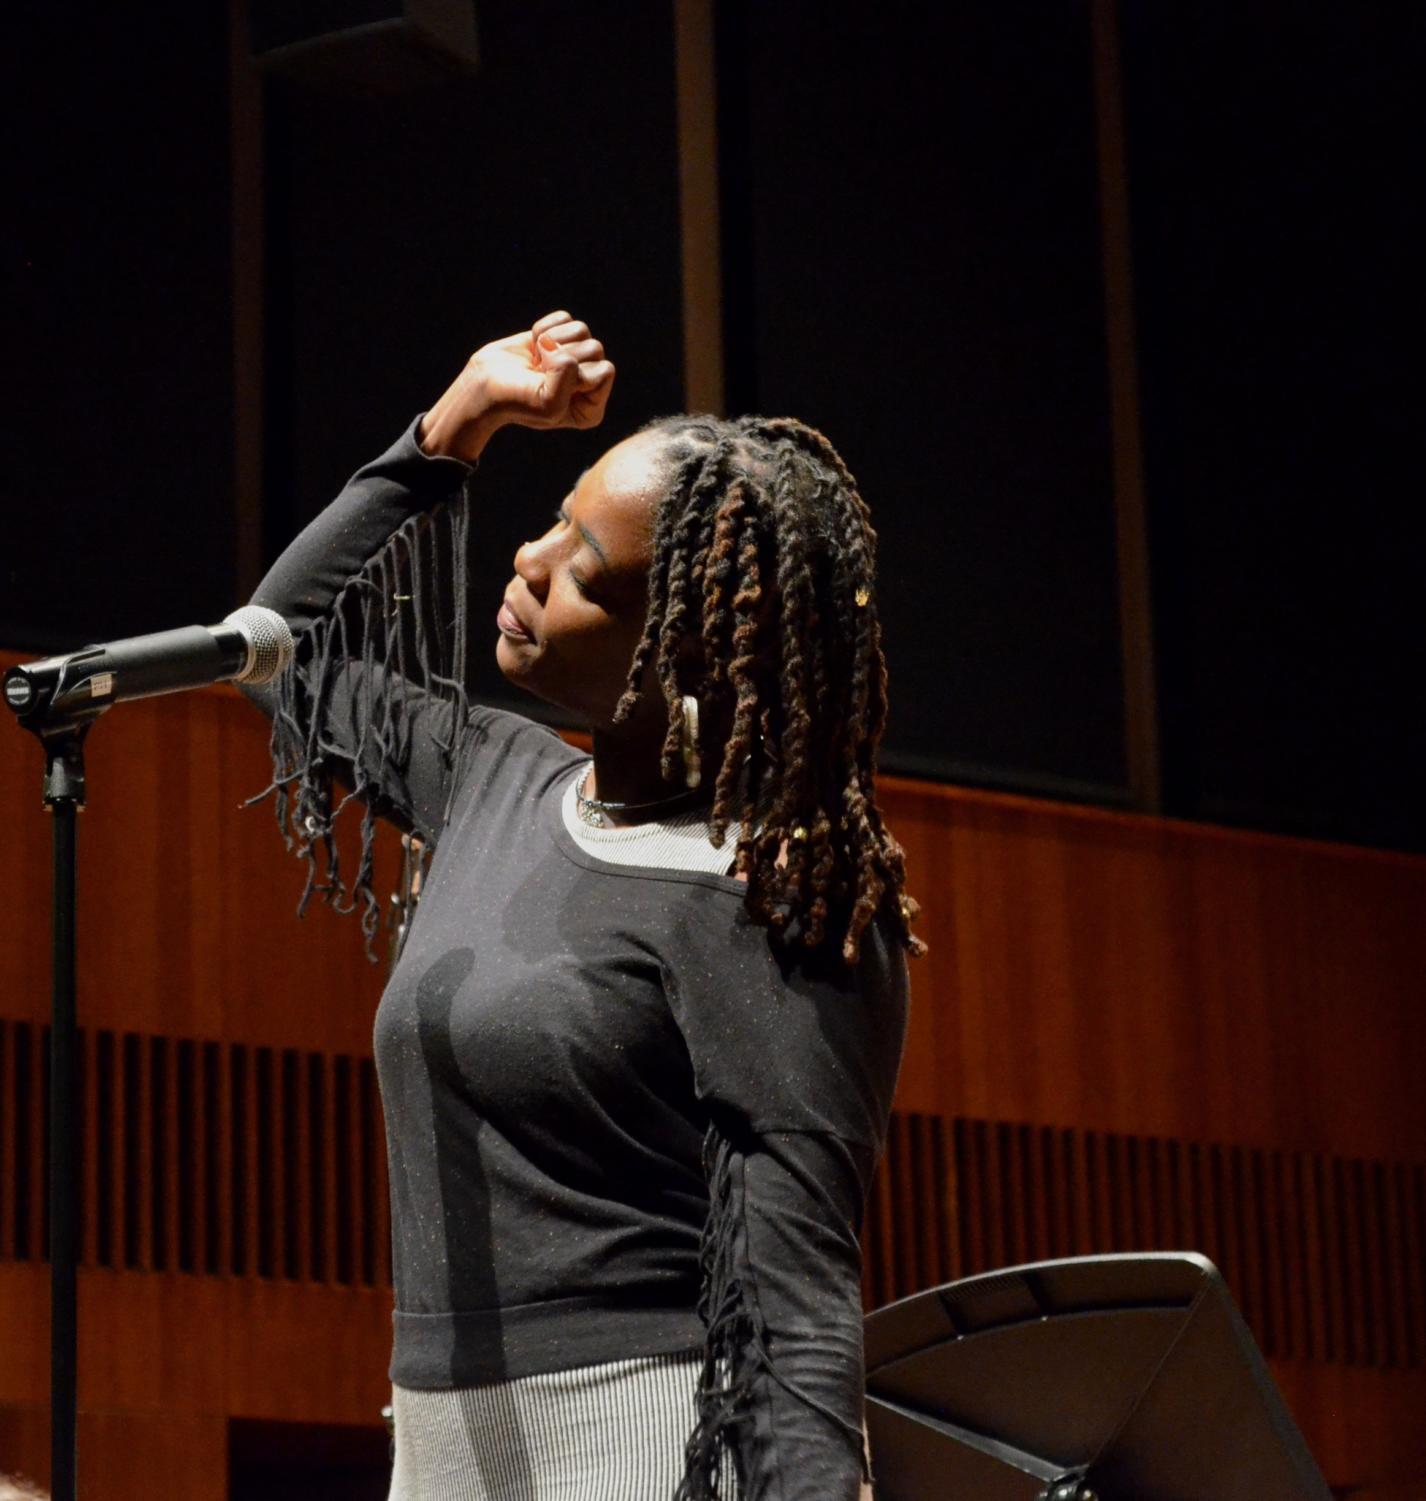 Nationally-renowned activist poet performs “Million Dollar Melanin”, a poem about the societal and personal history of black discrimination and the journey of self-worth.